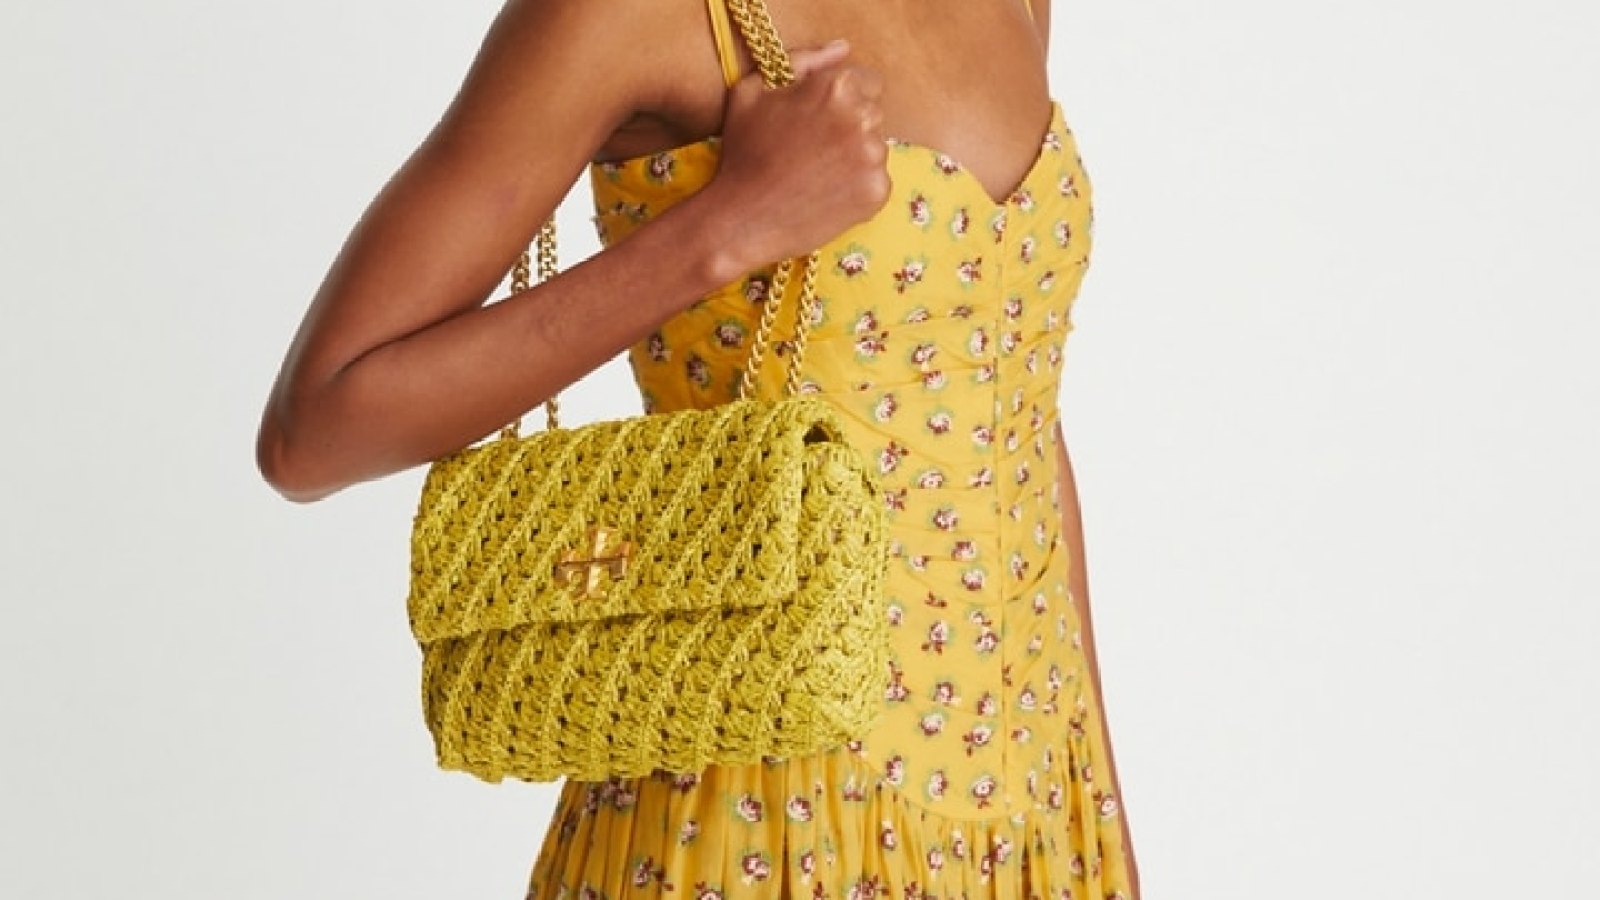 These 7 pretty spring handbags are over 50% off at Nordstrom Rack